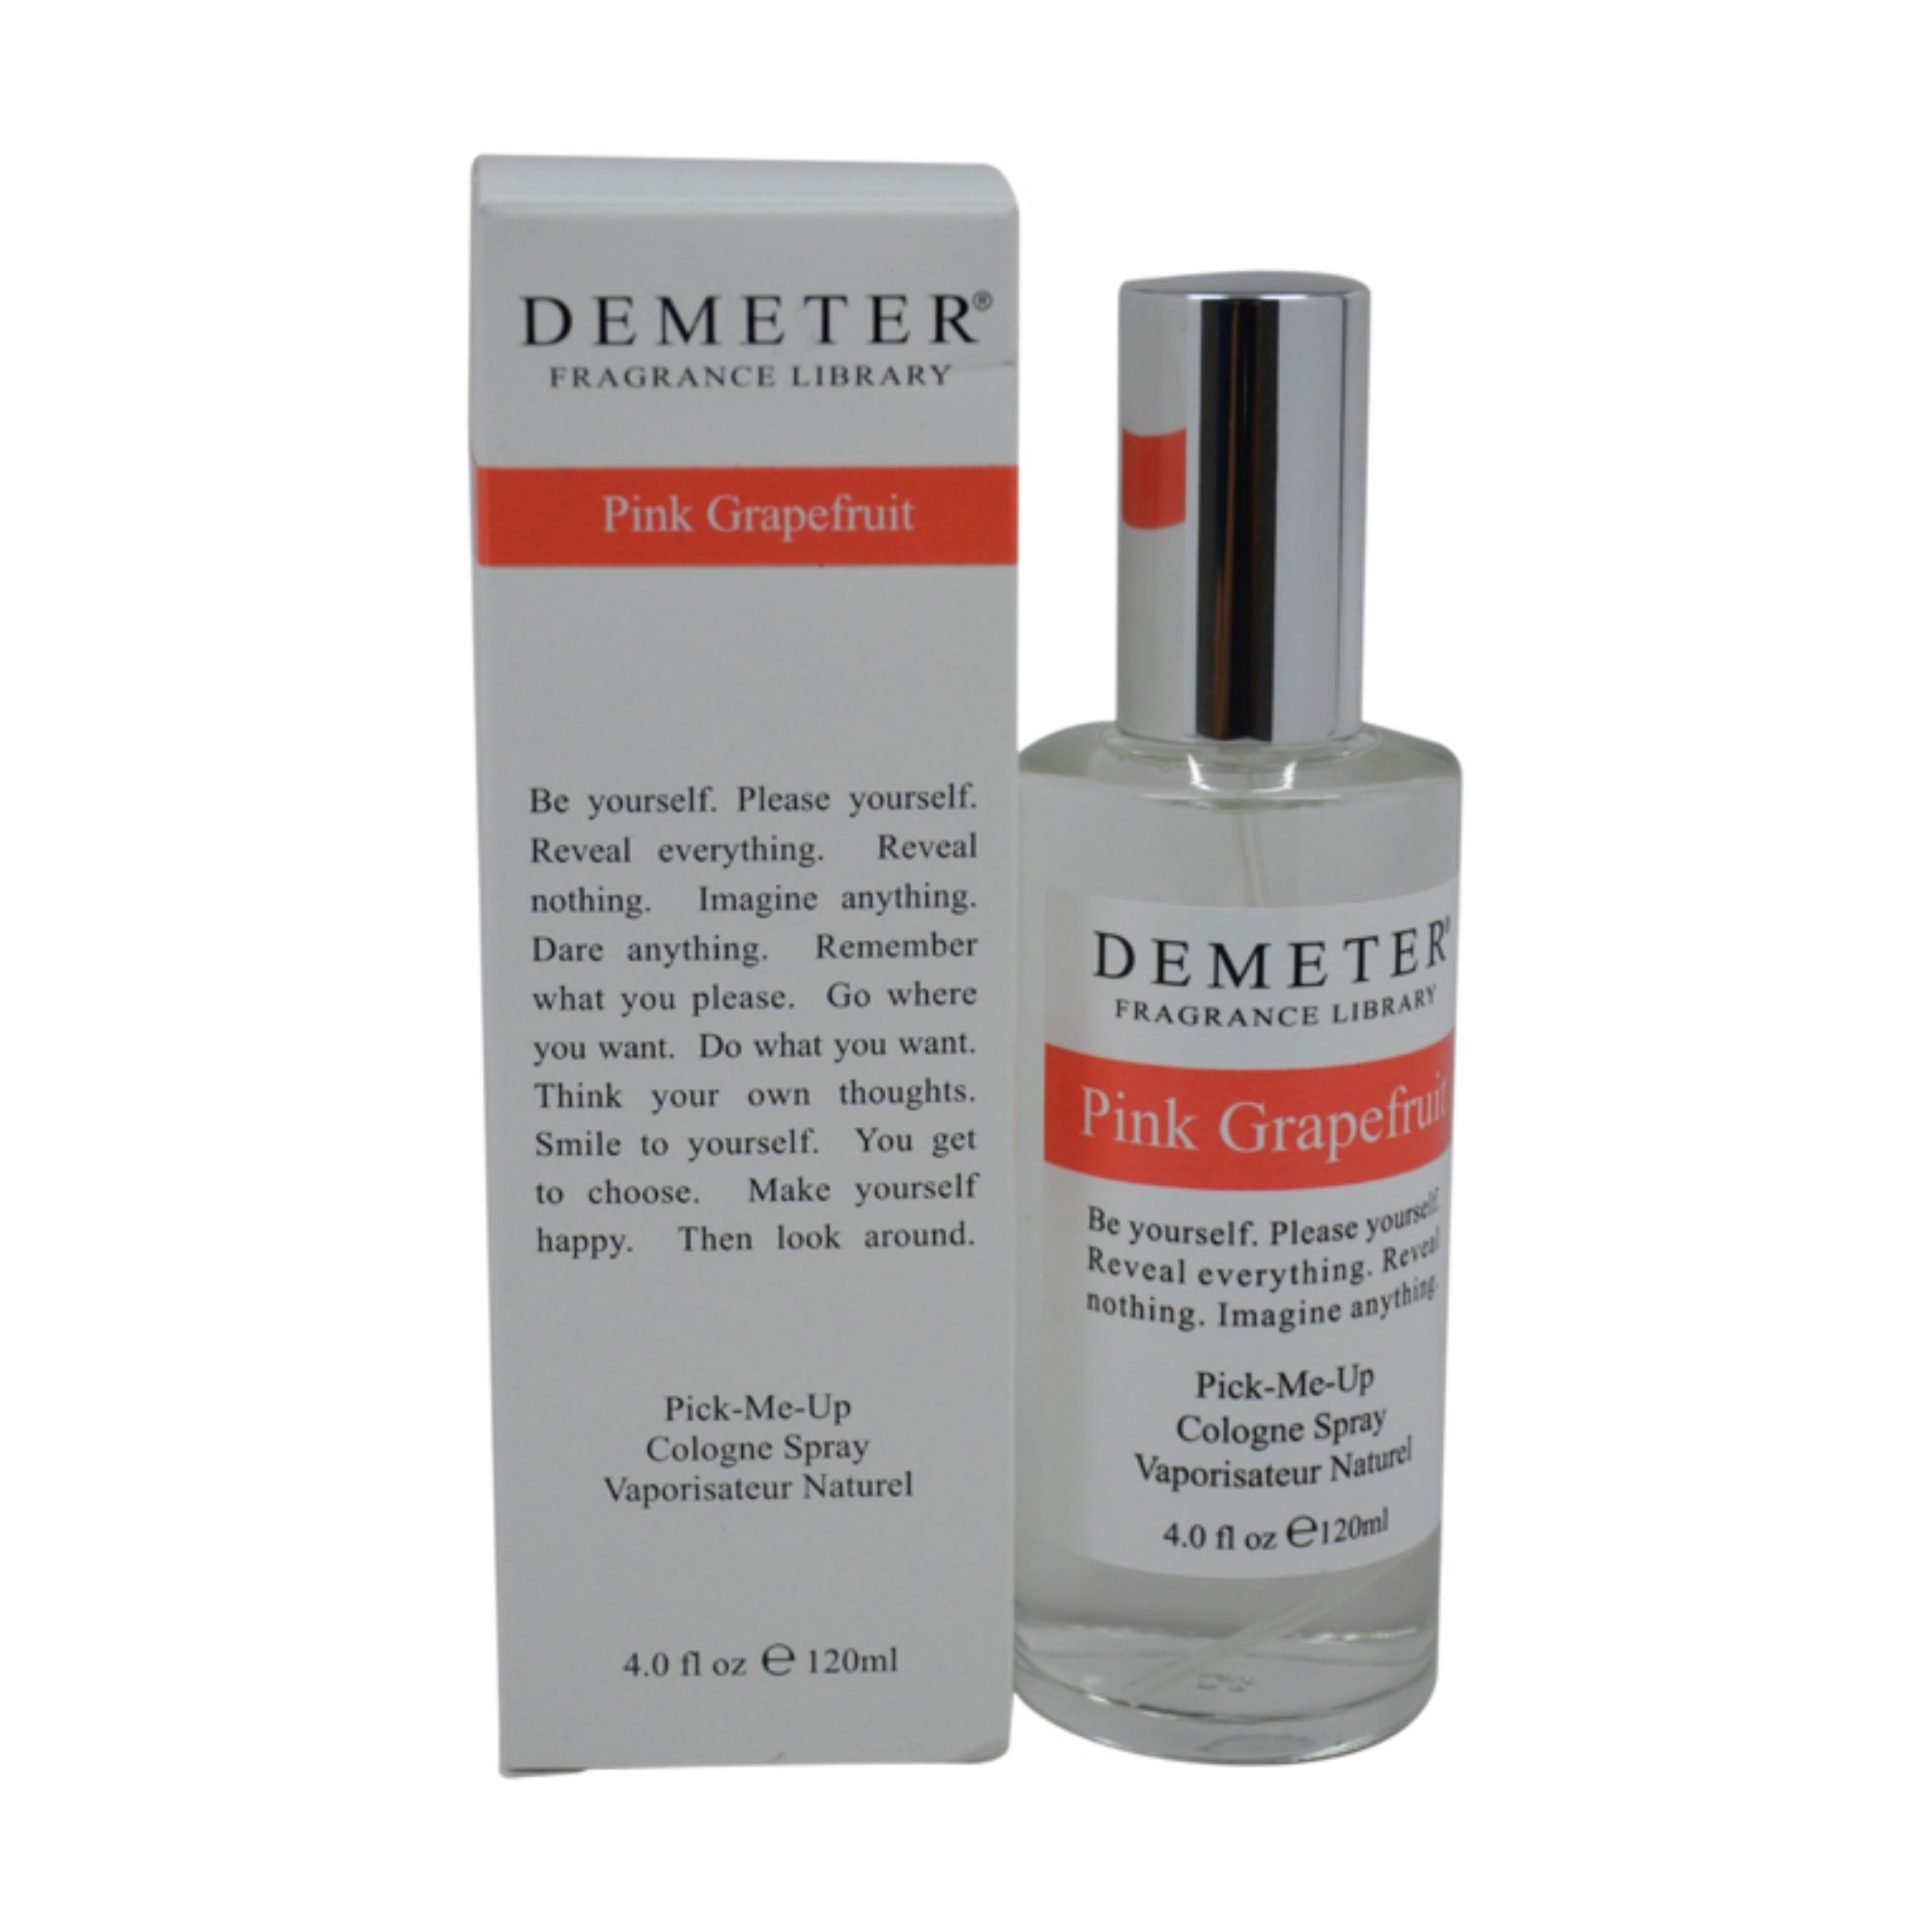 Pink Grapefruit by Demeter for Women - 4 oz Cologne Spray